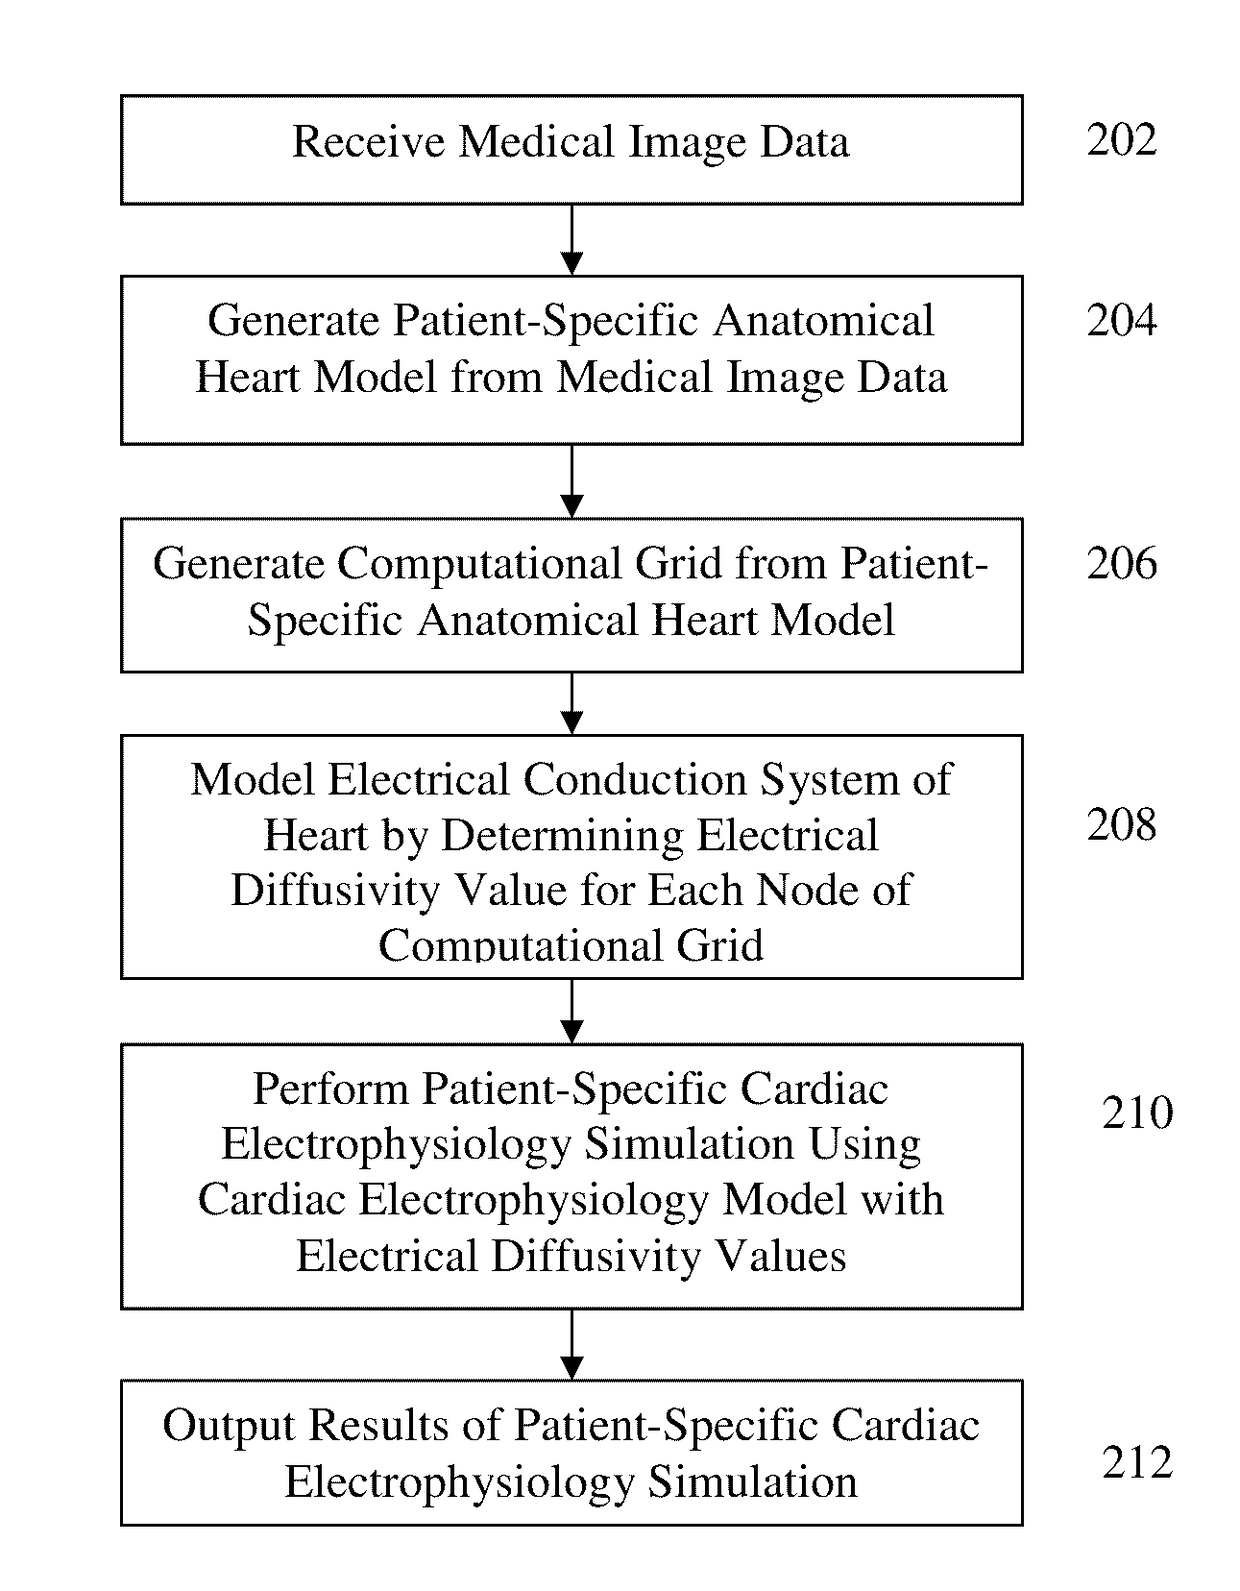 System and method for real-time simulation of patient-specific cardiac electrophysiology including the effect of the electrical conduction system of the heart